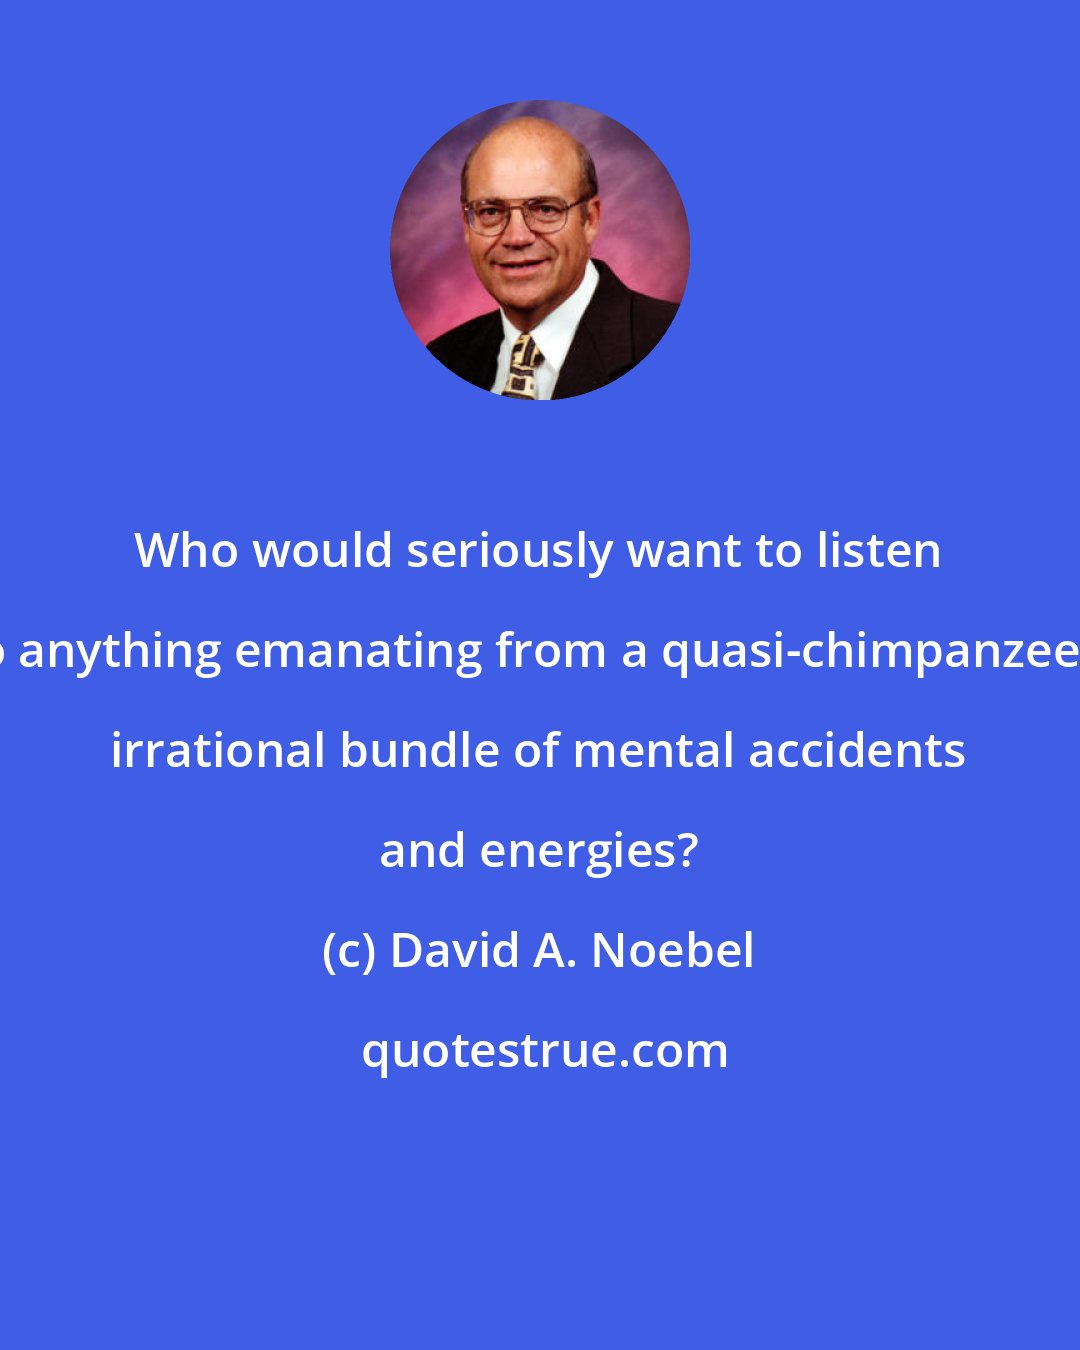 David A. Noebel: Who would seriously want to listen to anything emanating from a quasi-chimpanzee's irrational bundle of mental accidents and energies?